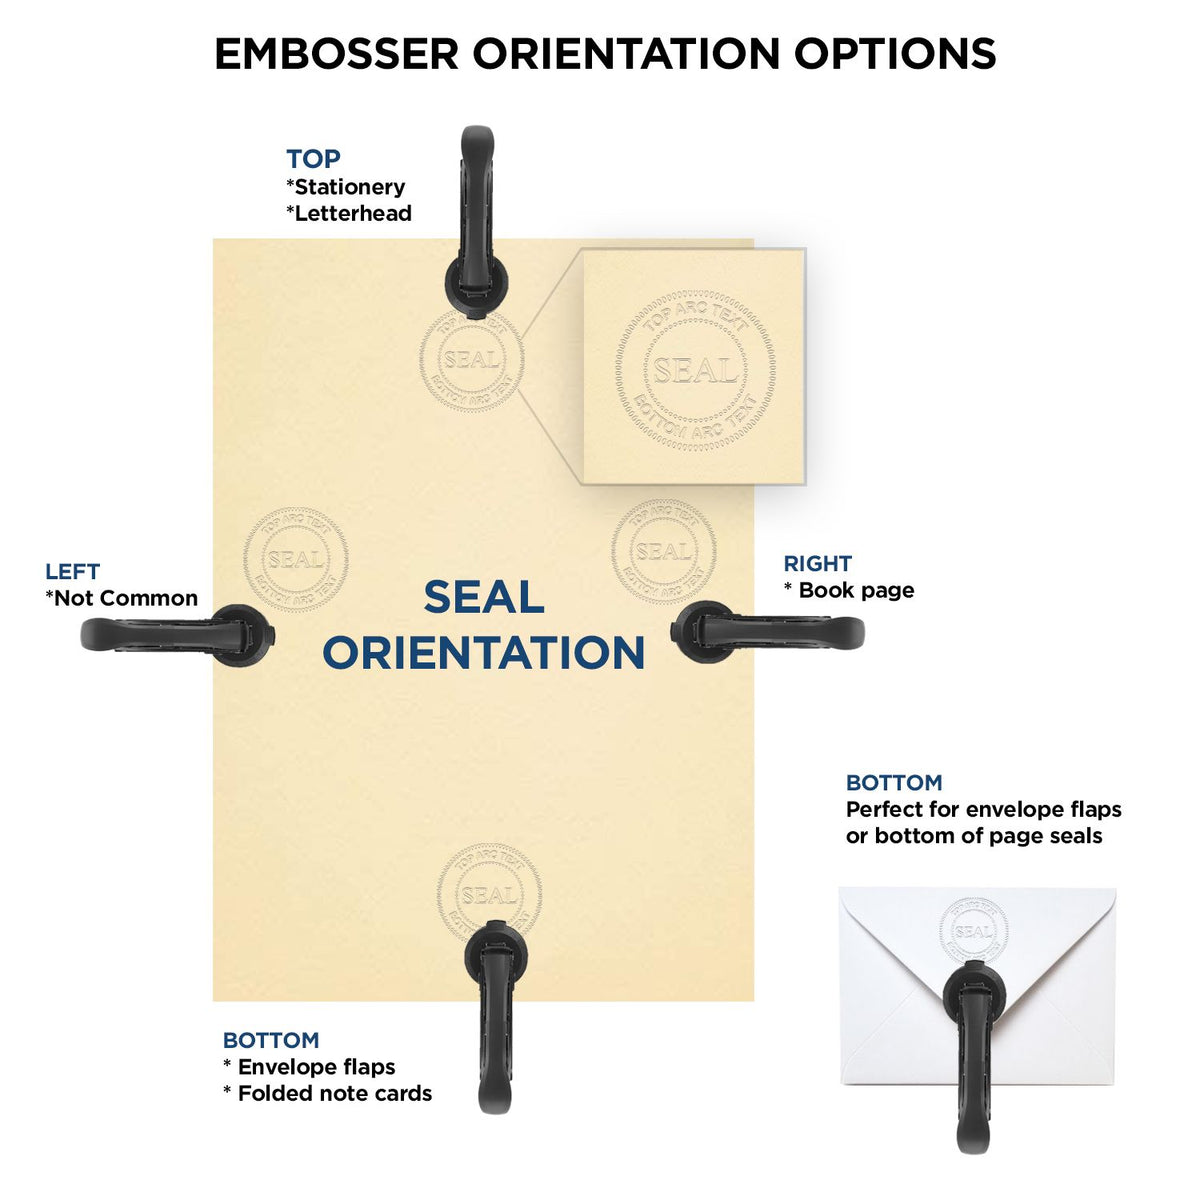 An infographic for the Heavy Duty Cast Iron Tennessee Engineer Seal Embosser showing embosser orientation, this is showing examples of a top, bottom, right and left insert.